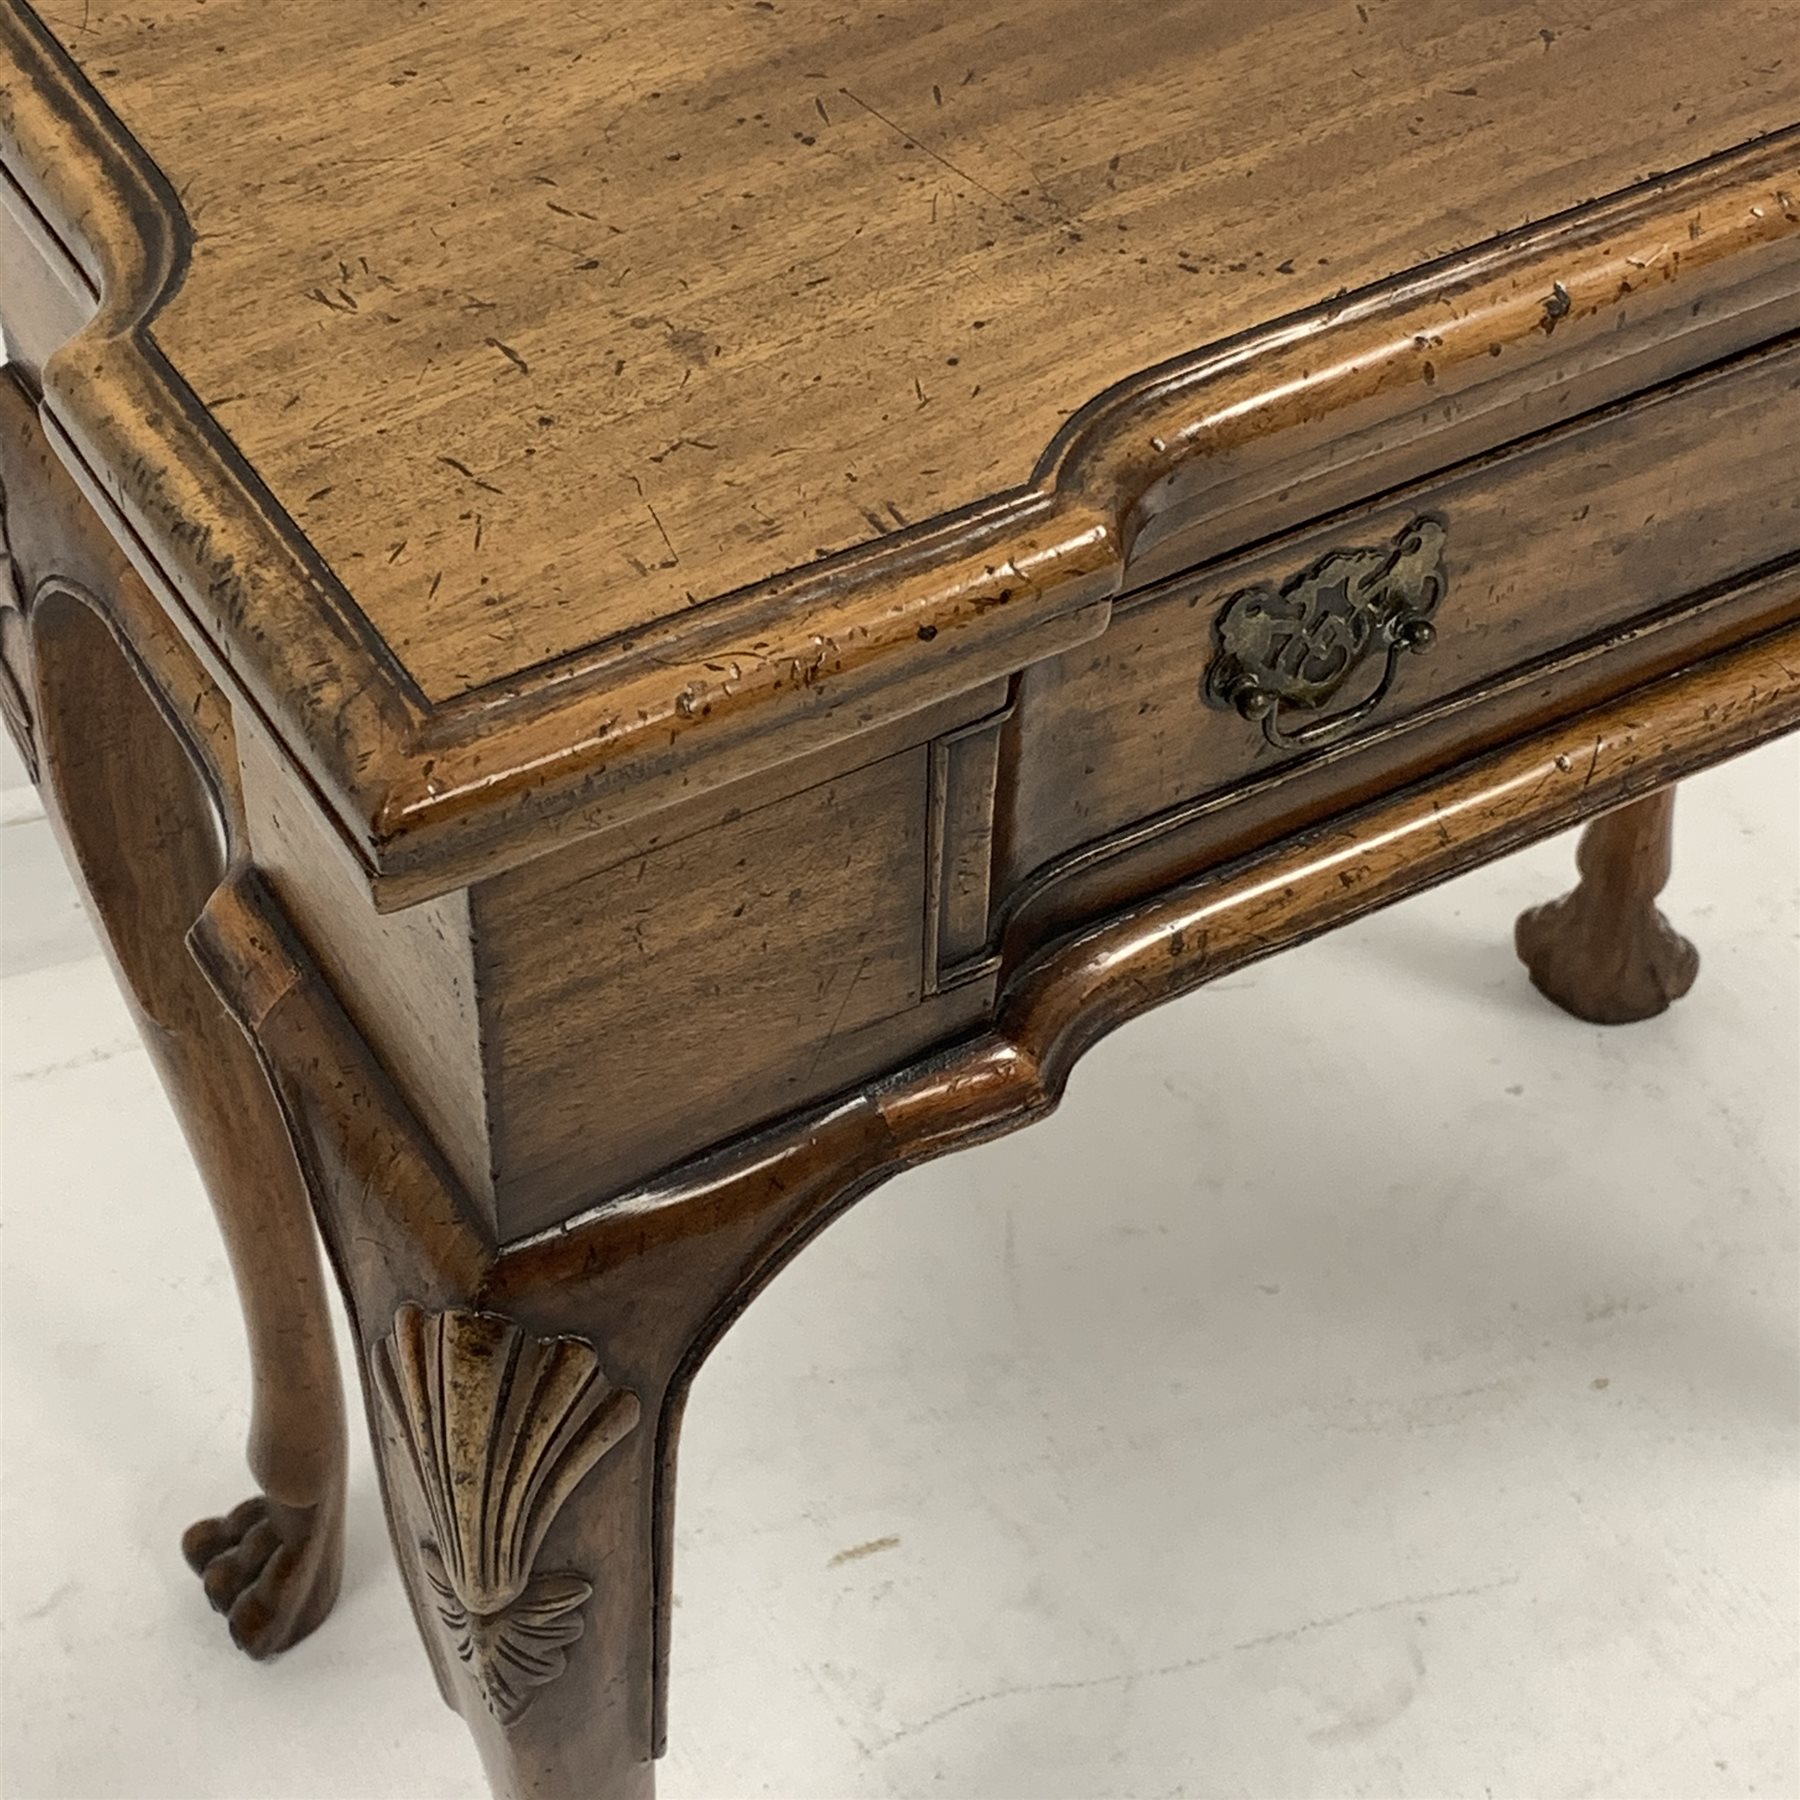 Georgian style mahogany reverse breakfront games table, moulded fold over top with inlaid chess boar - Image 2 of 6